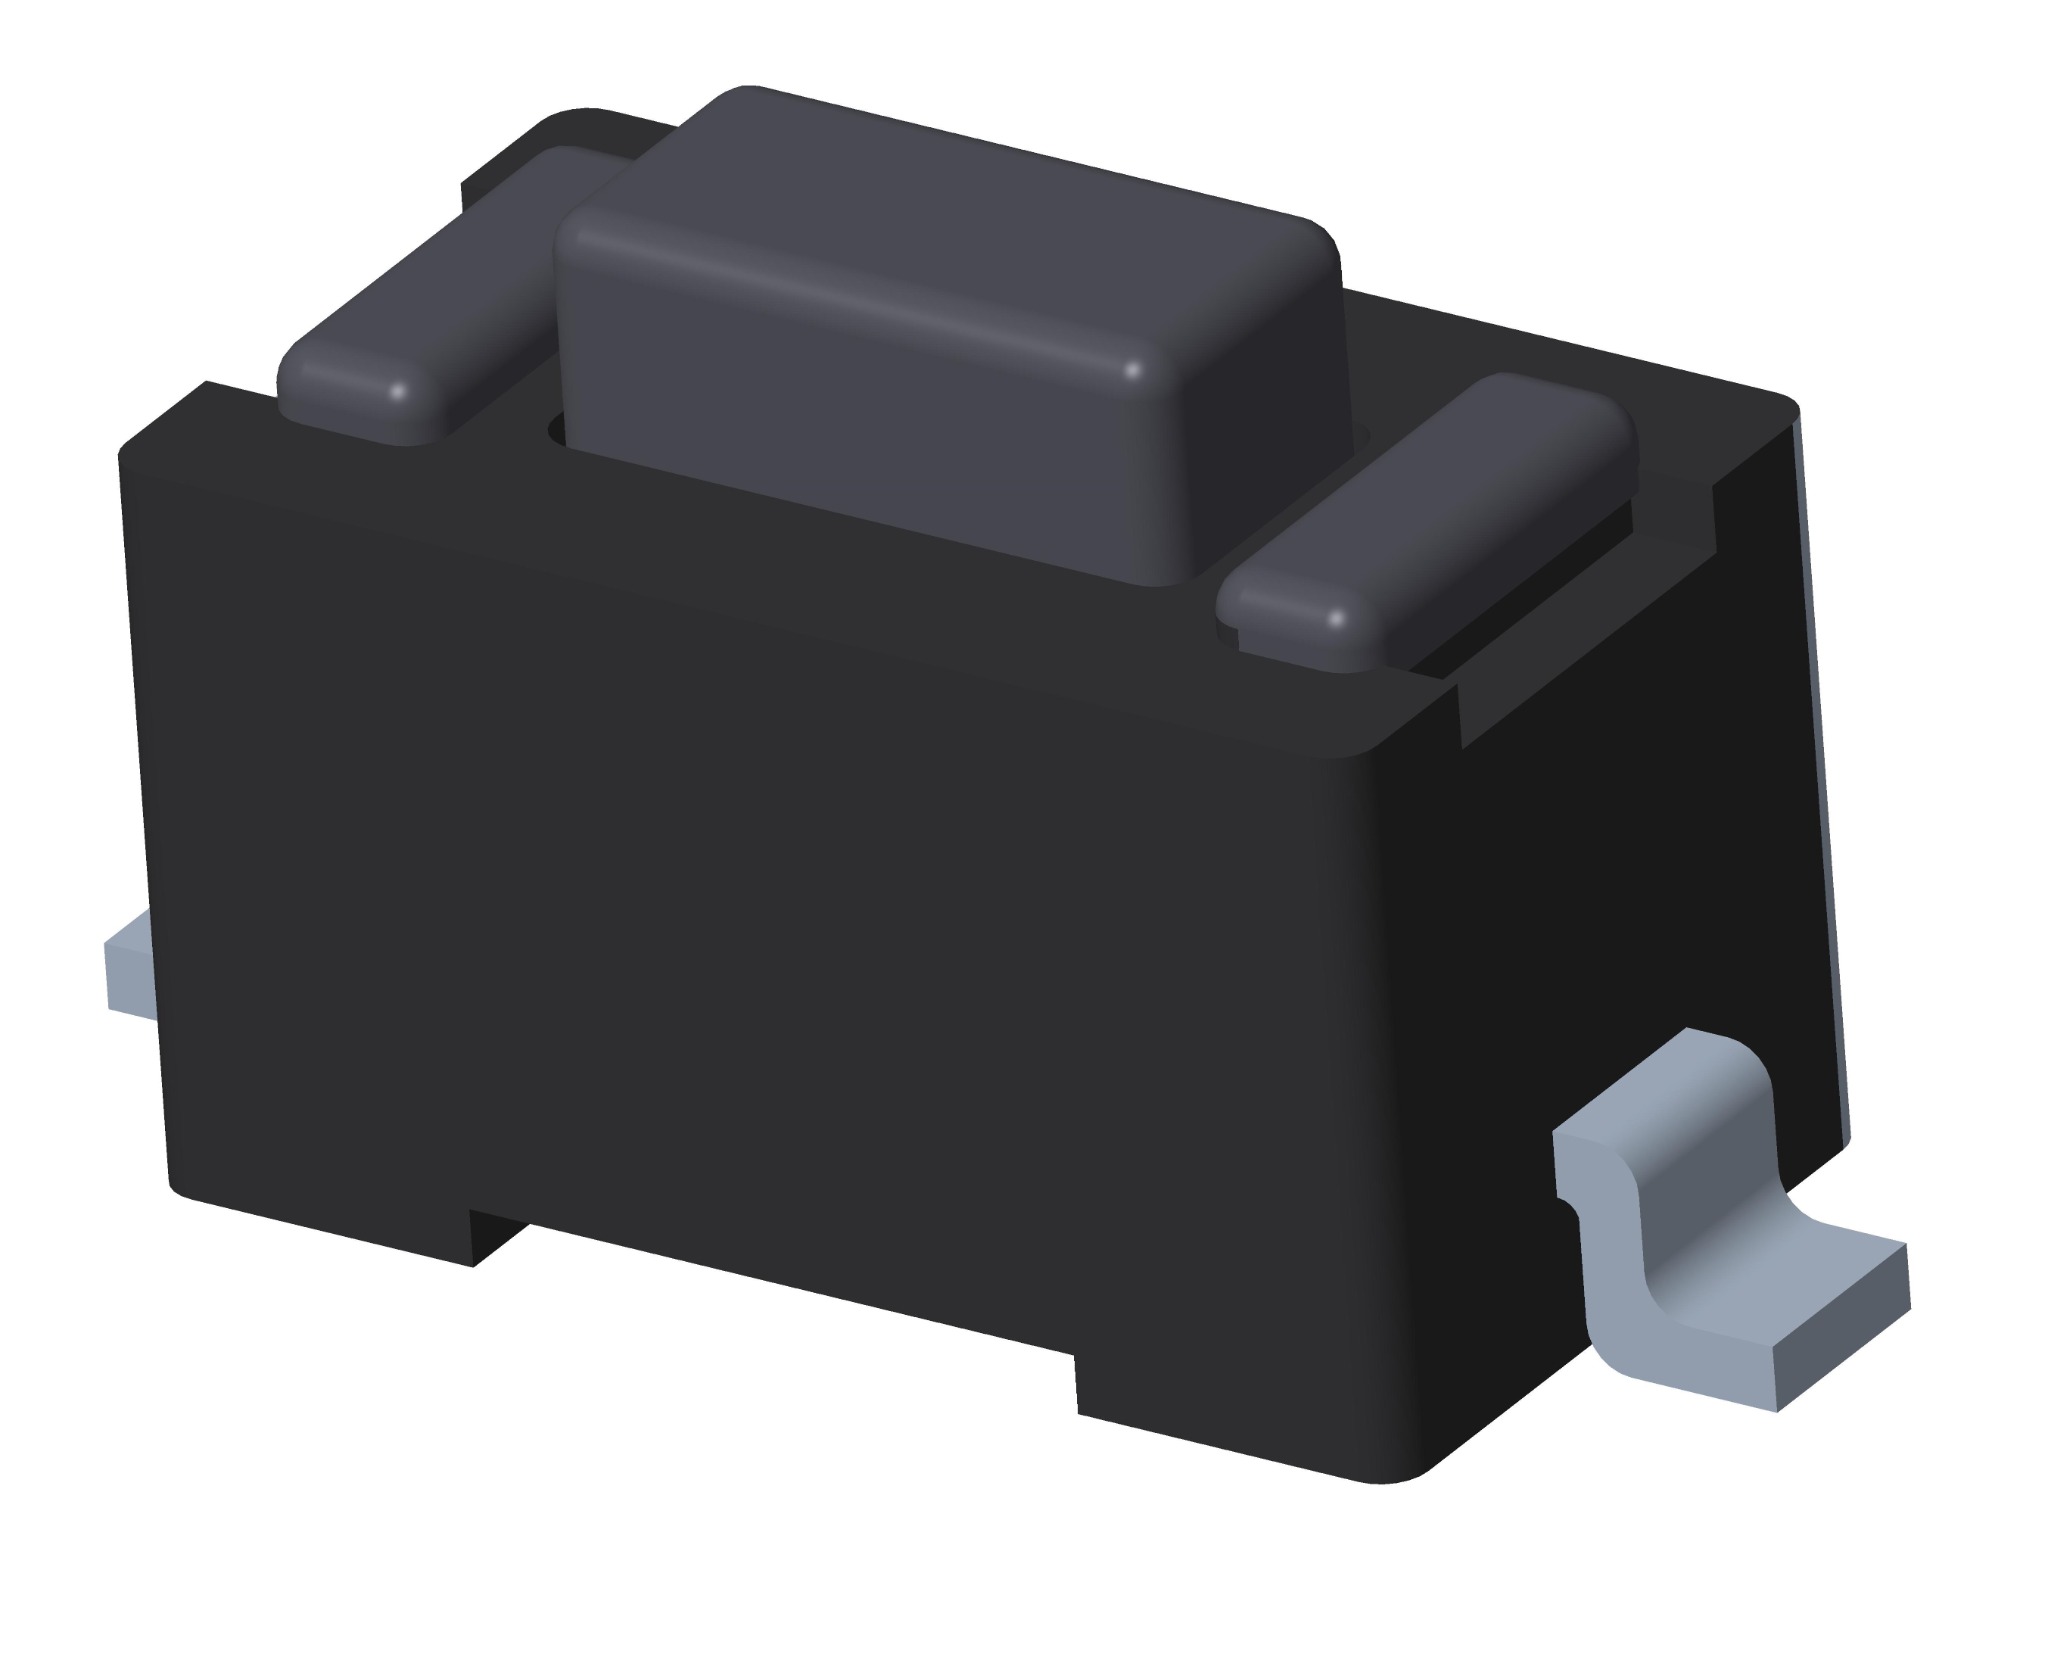 Tact Switch Manufacturers